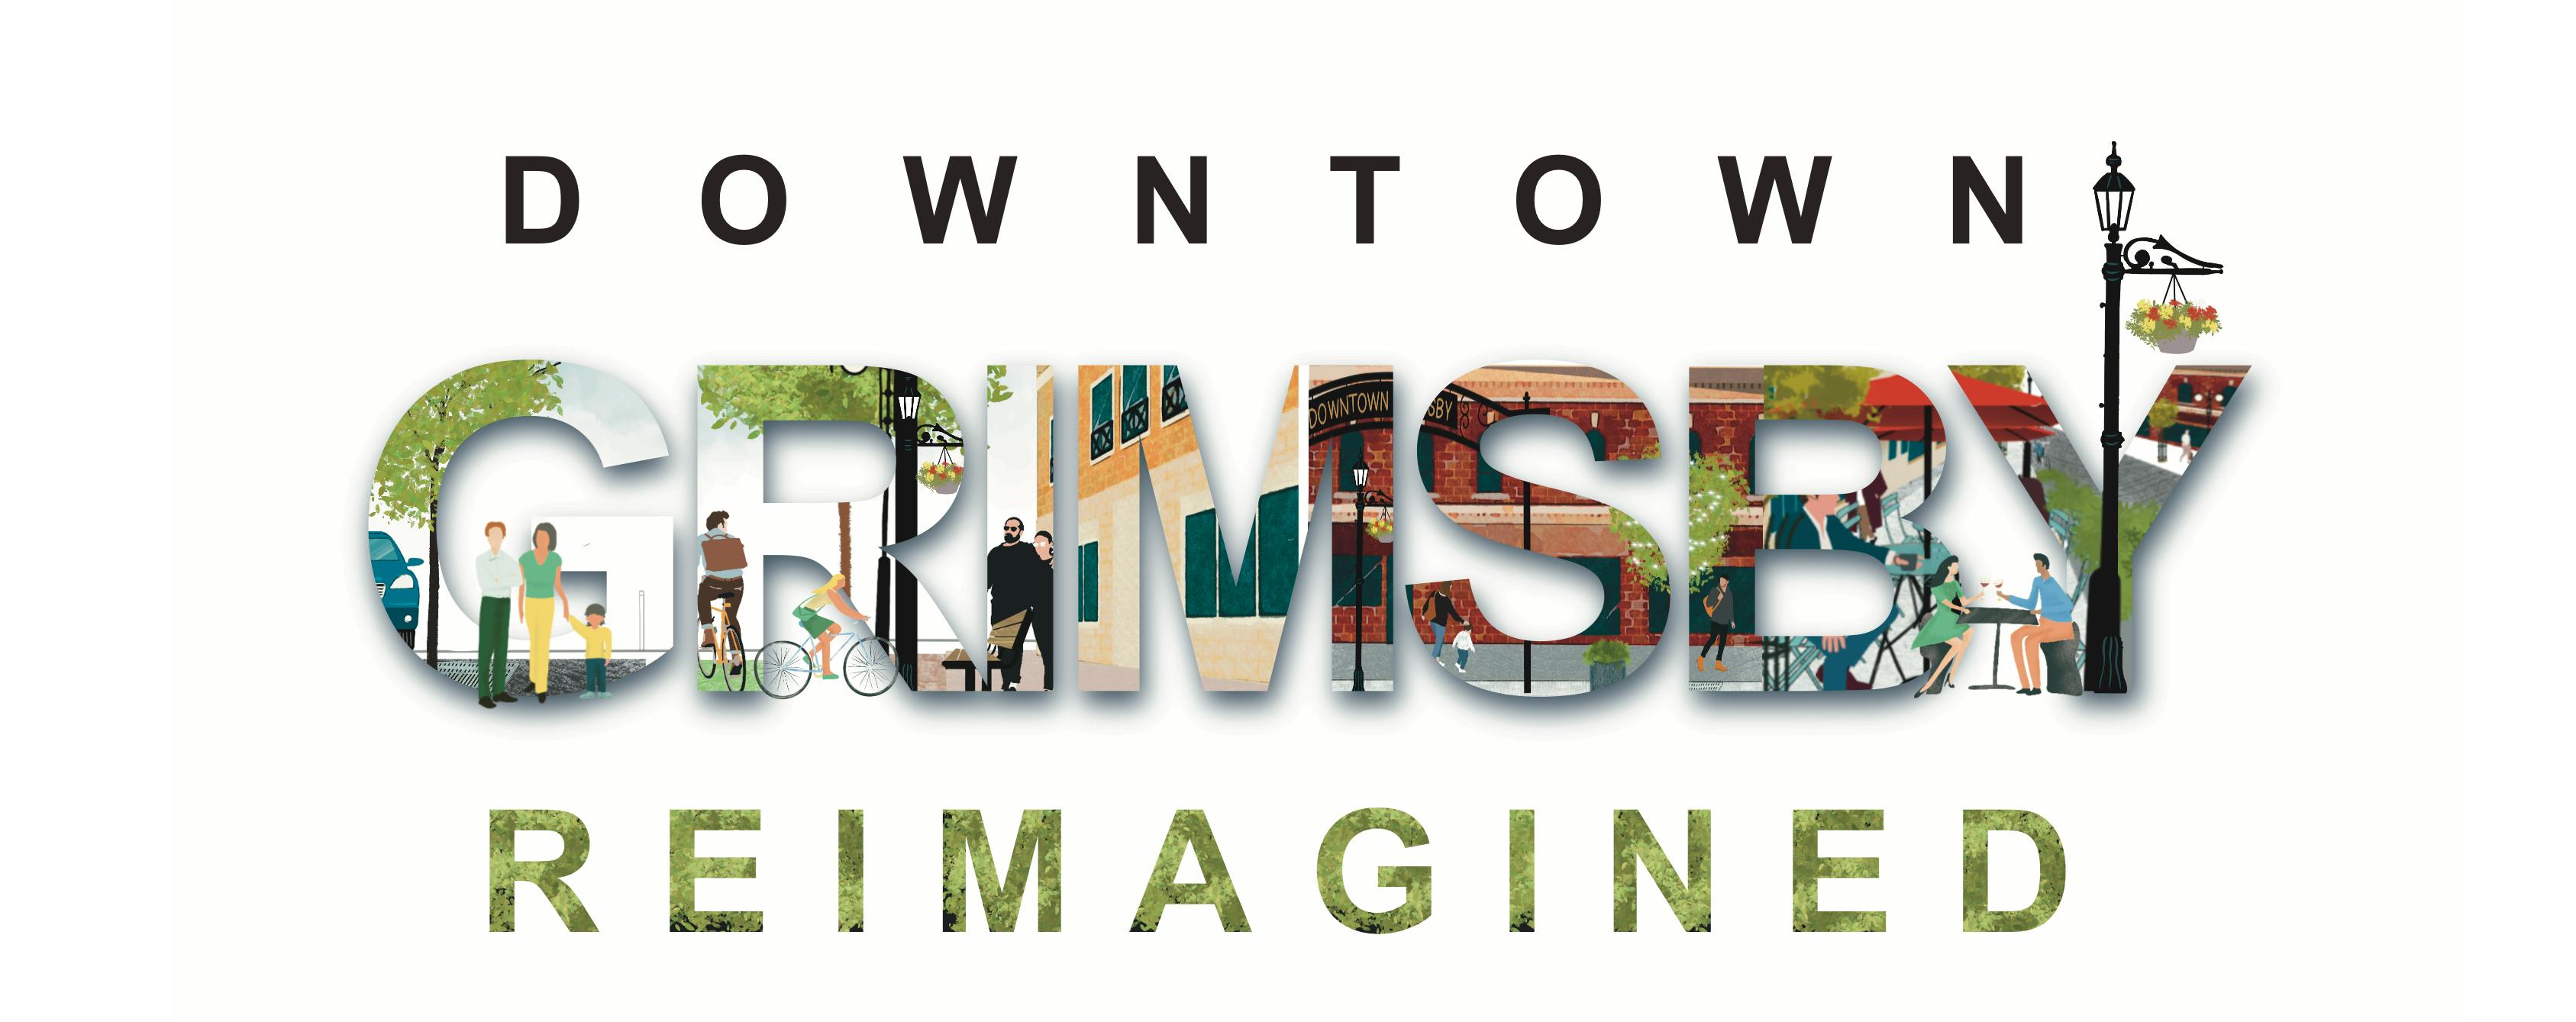 Downtown Reimagined